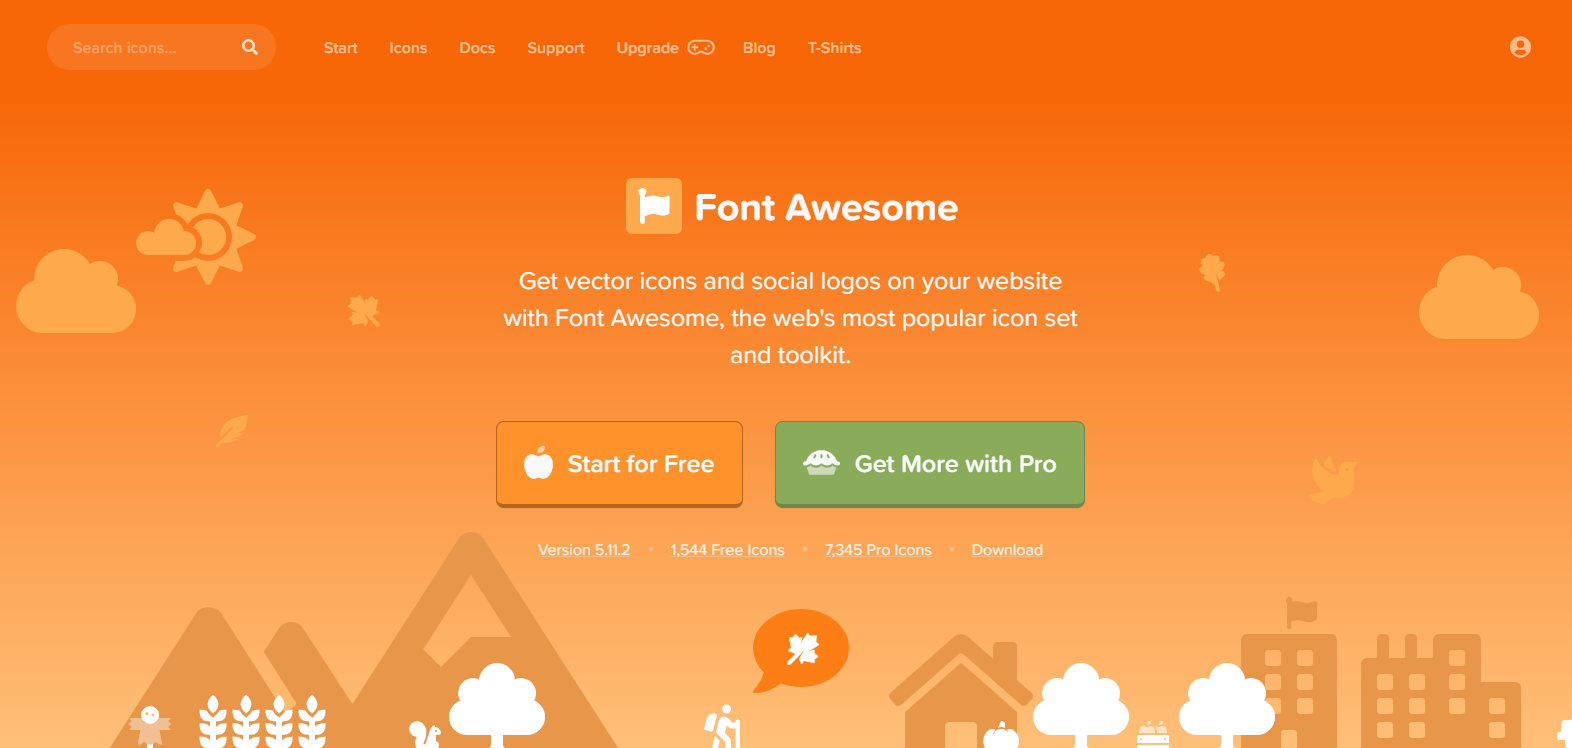 Font Awesome Official Webpage